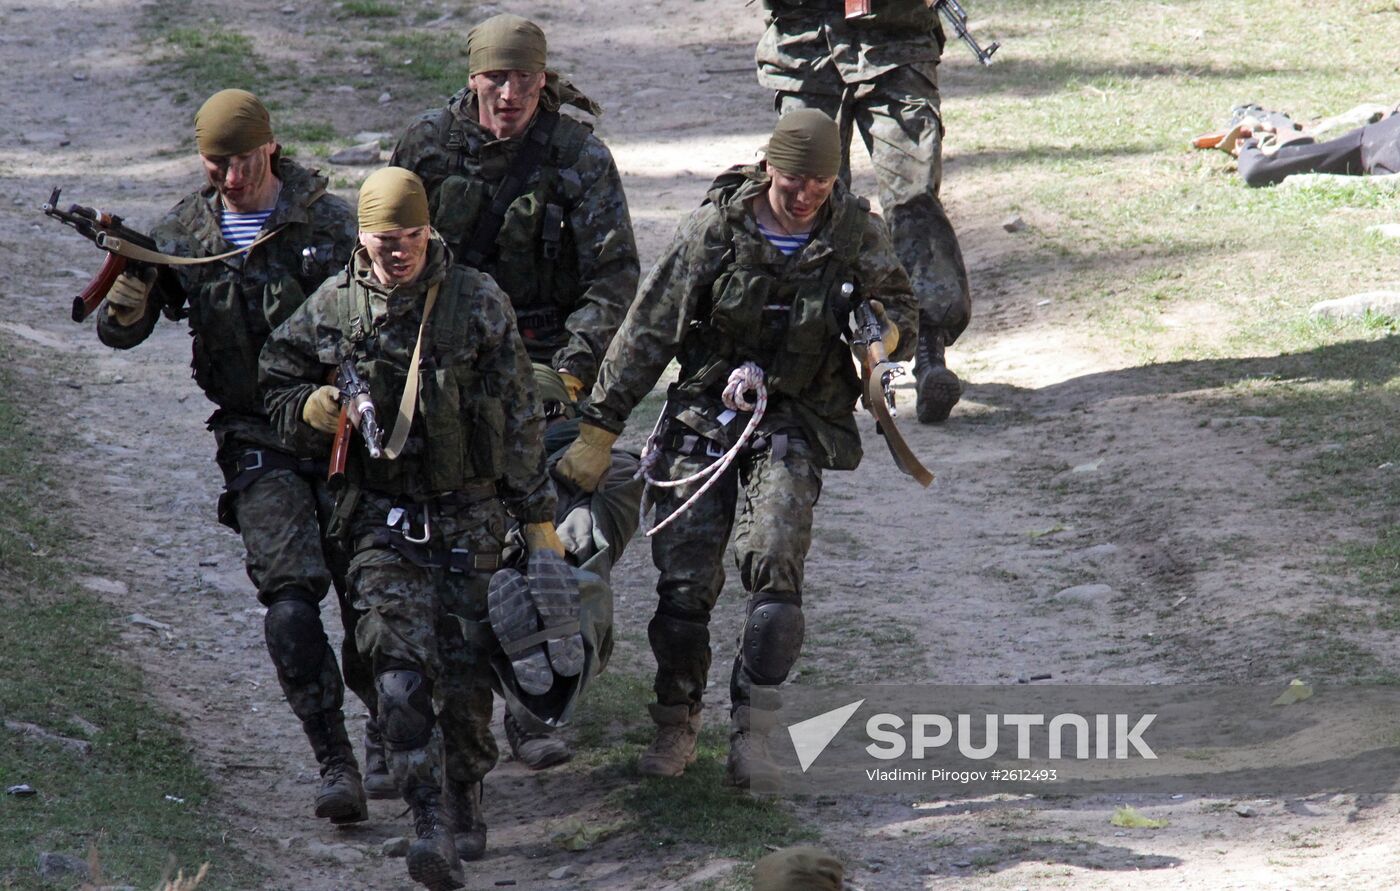 SCO special forces hold military drills in Kyrgyzstan